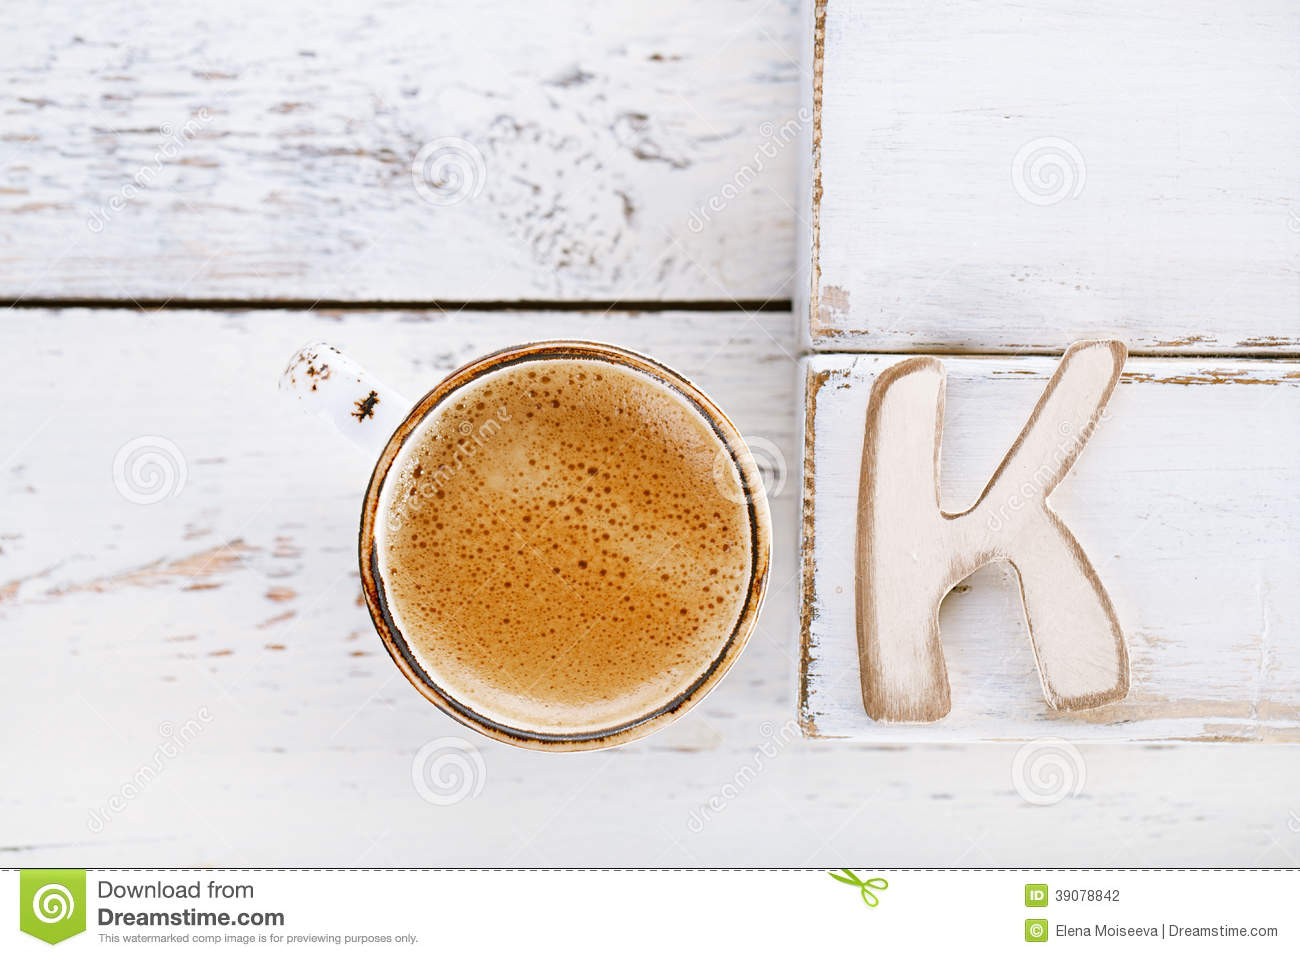 With Espresso Coffee In Cup And K Letter Stock Photo   Image  39078842